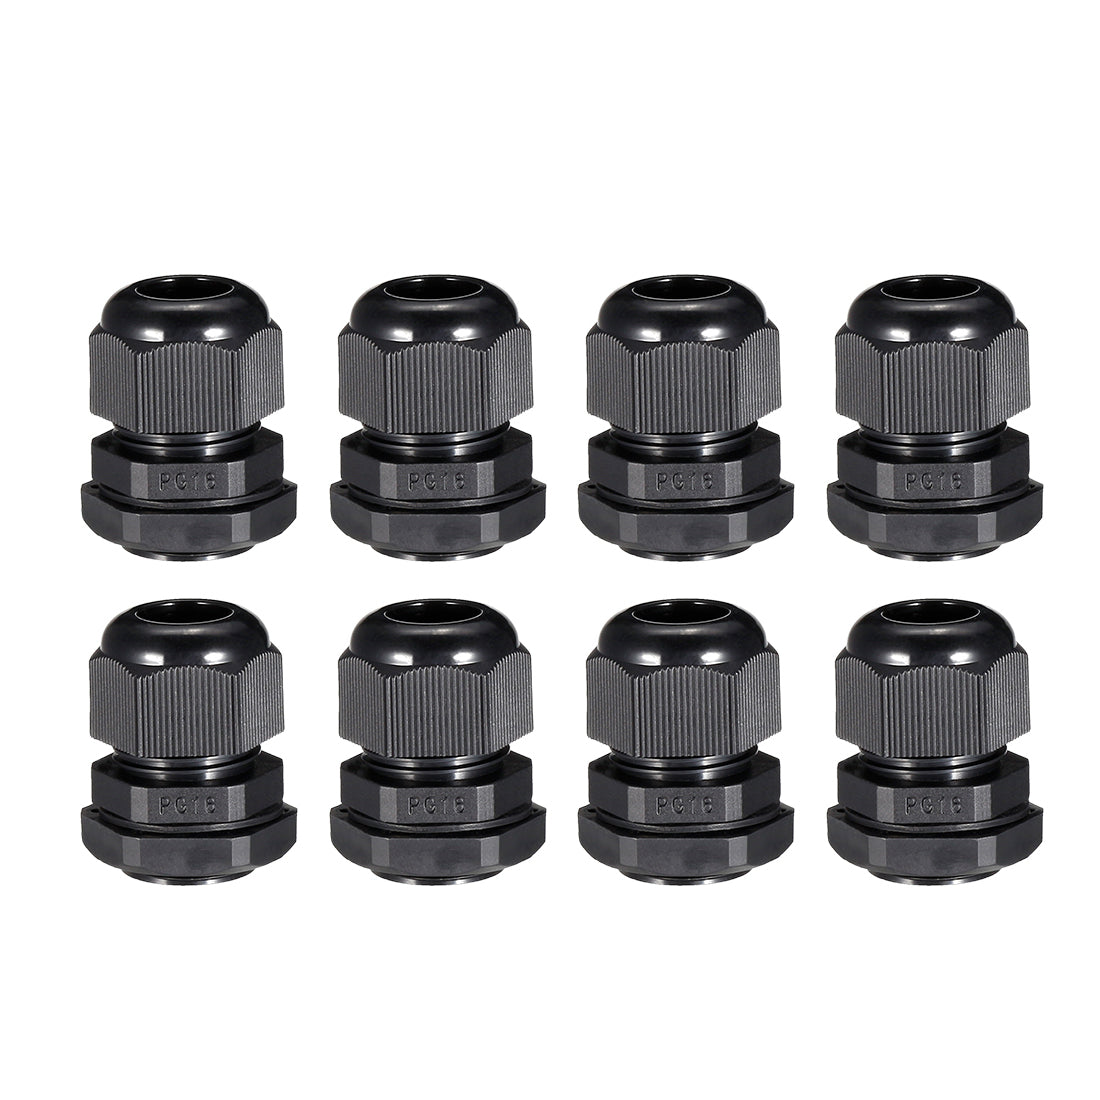 uxcell Uxcell PG16 Cable Gland Waterproof Plastic Joint Adjustable Locknut for 10-14mm Dia Cable Wire 8Pcs